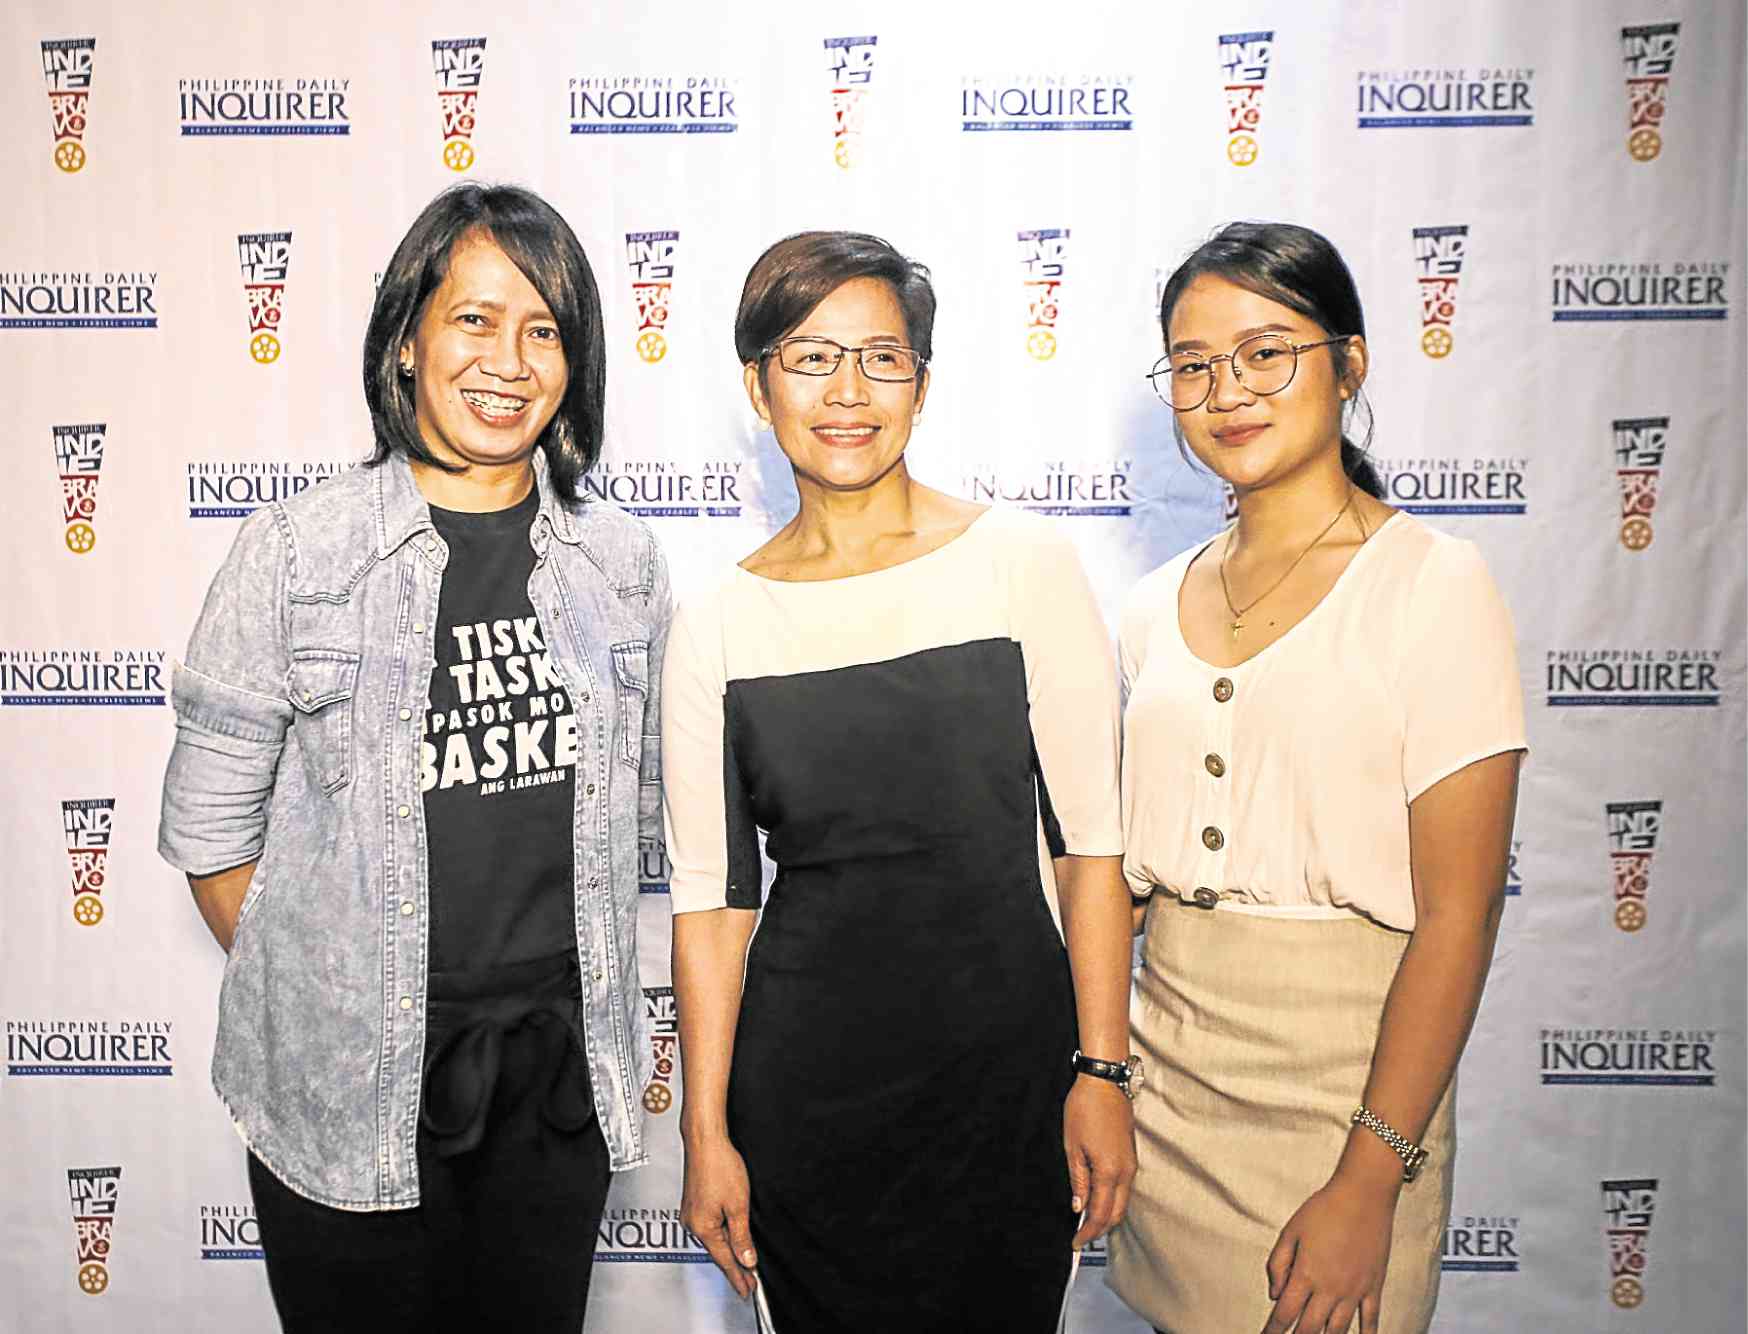 Indie Bravo! Awardees pay tribute to the late Inquirer Entertainment journo Bayani San Diego Jr.